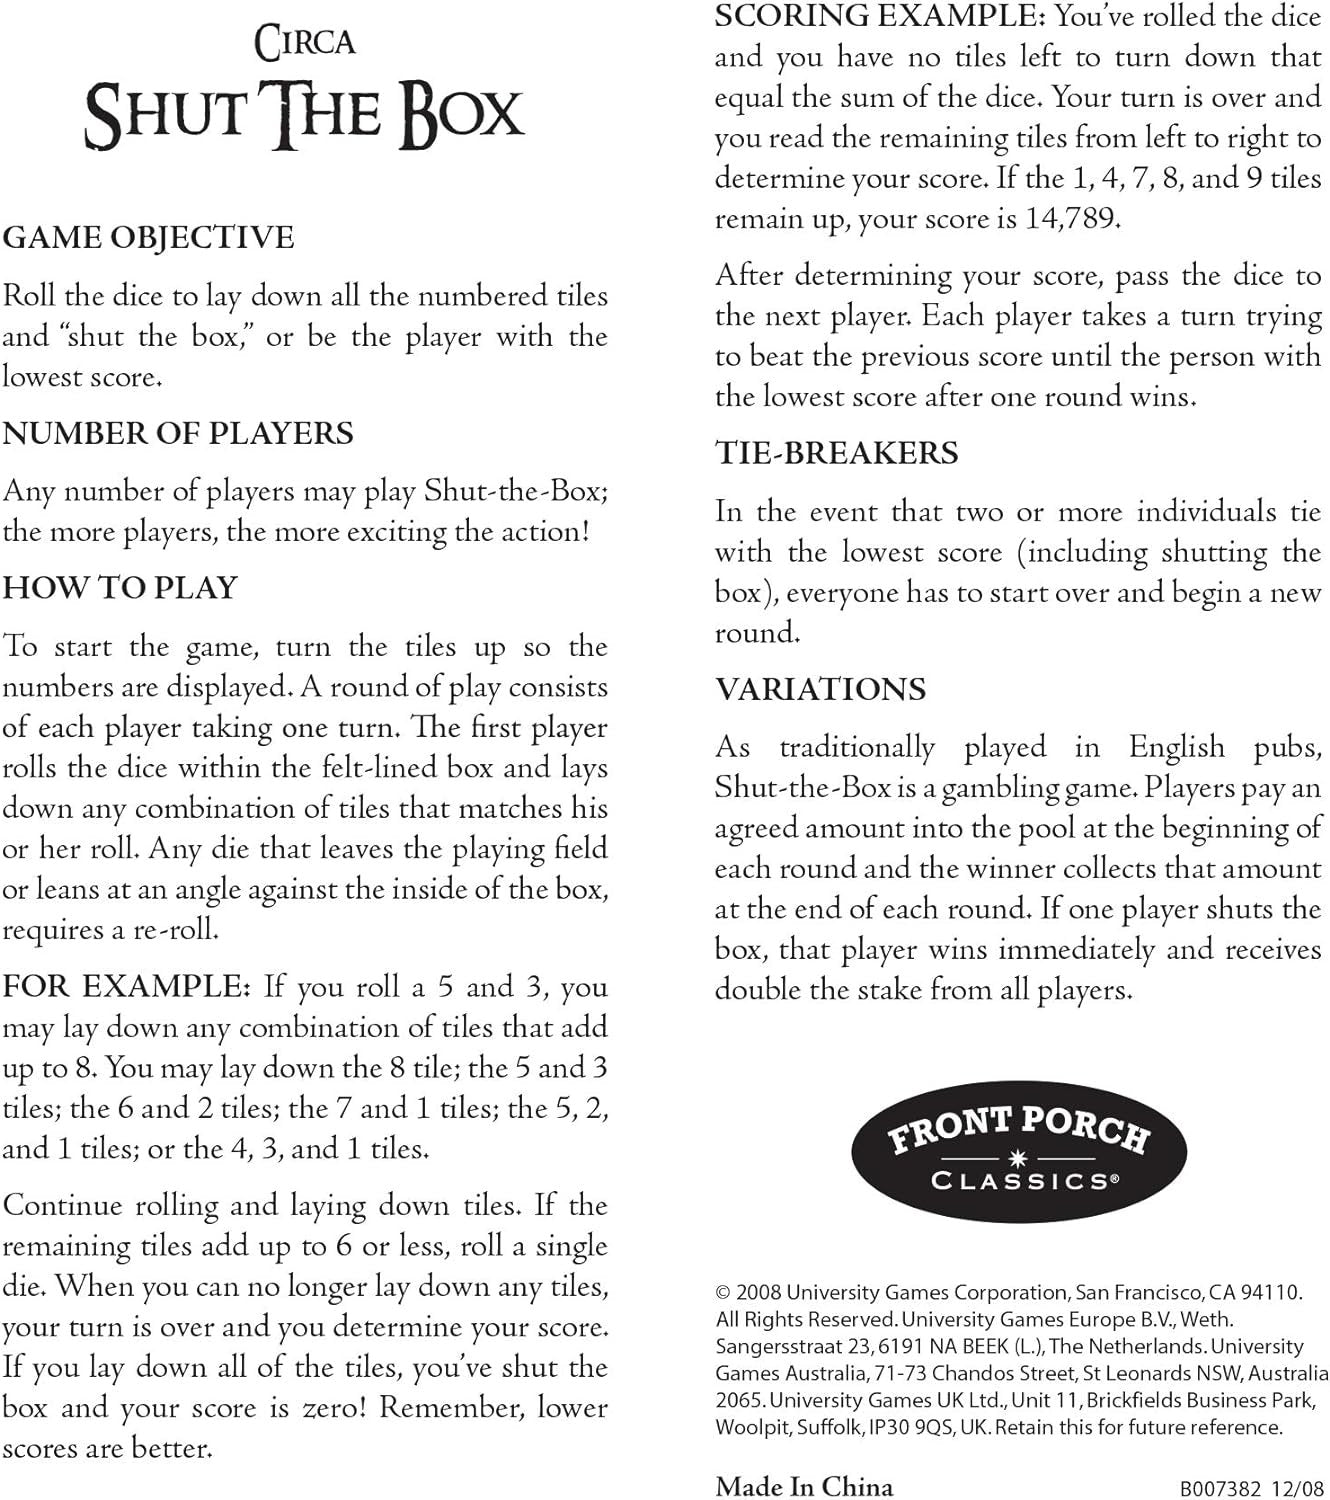 Front Porch Classics Circa Shut-the-Box, Wooden 9 Number Dice Game with Case for Travel, for Adults and Kids Ages 8 and Up